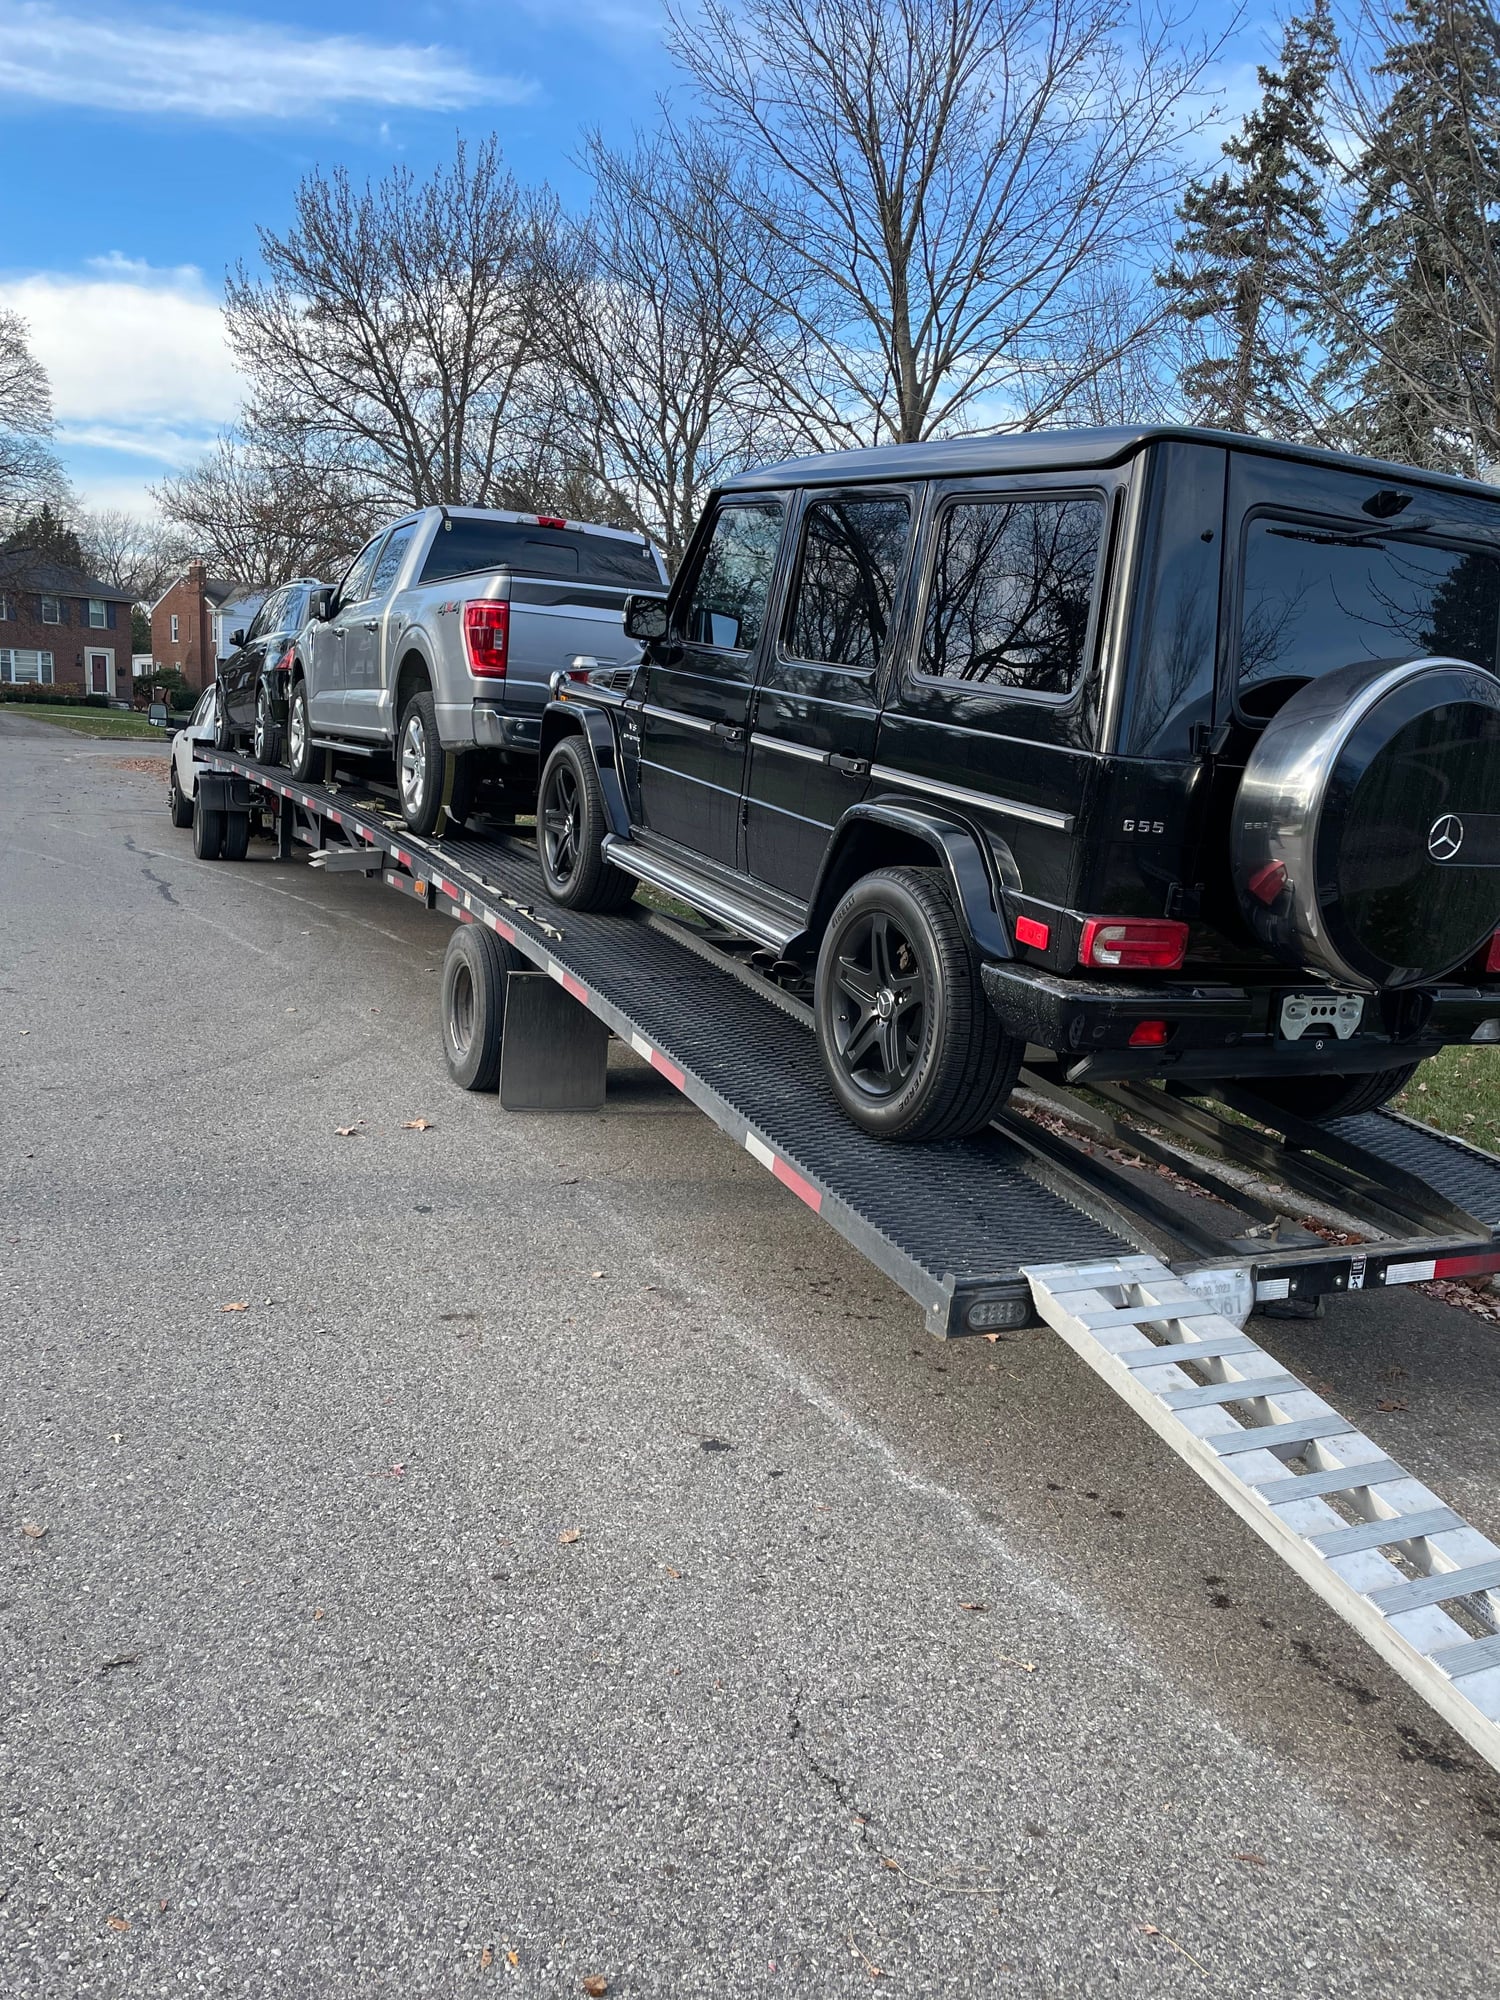 2011 Mercedes-Benz G55 AMG - 2011 G55 31k Miles Looking to Trade - Used - VIN WDCYC7BF6BX187592 - 32,500 Miles - 8 cyl - 4WD - Automatic - SUV - Black - Jackson, NJ 08527, United States